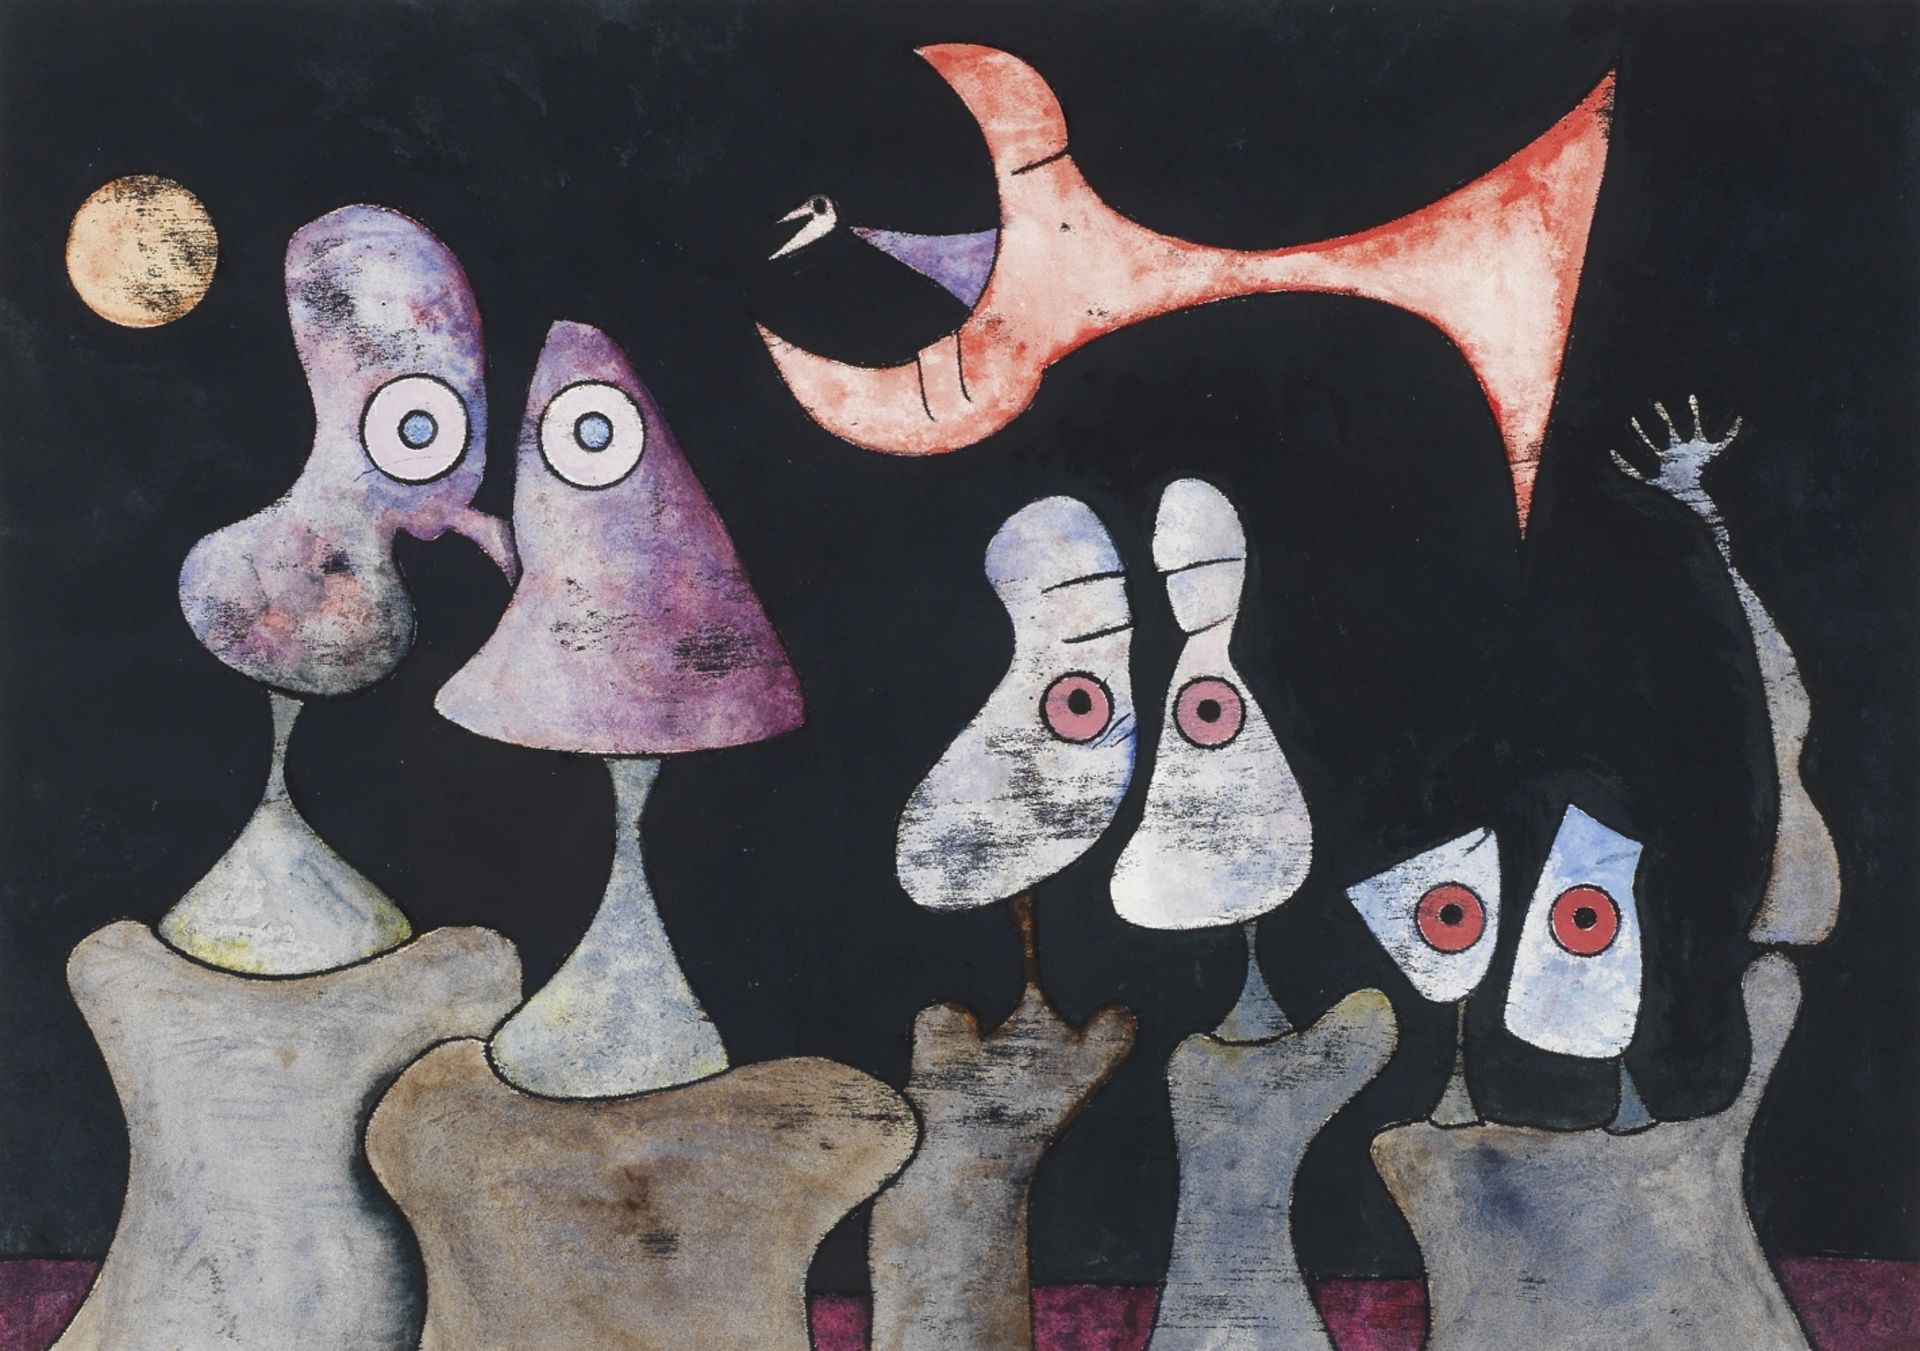 Desmond Morris (British, born 1928) The Party Goers (Completed 8 August 2008)